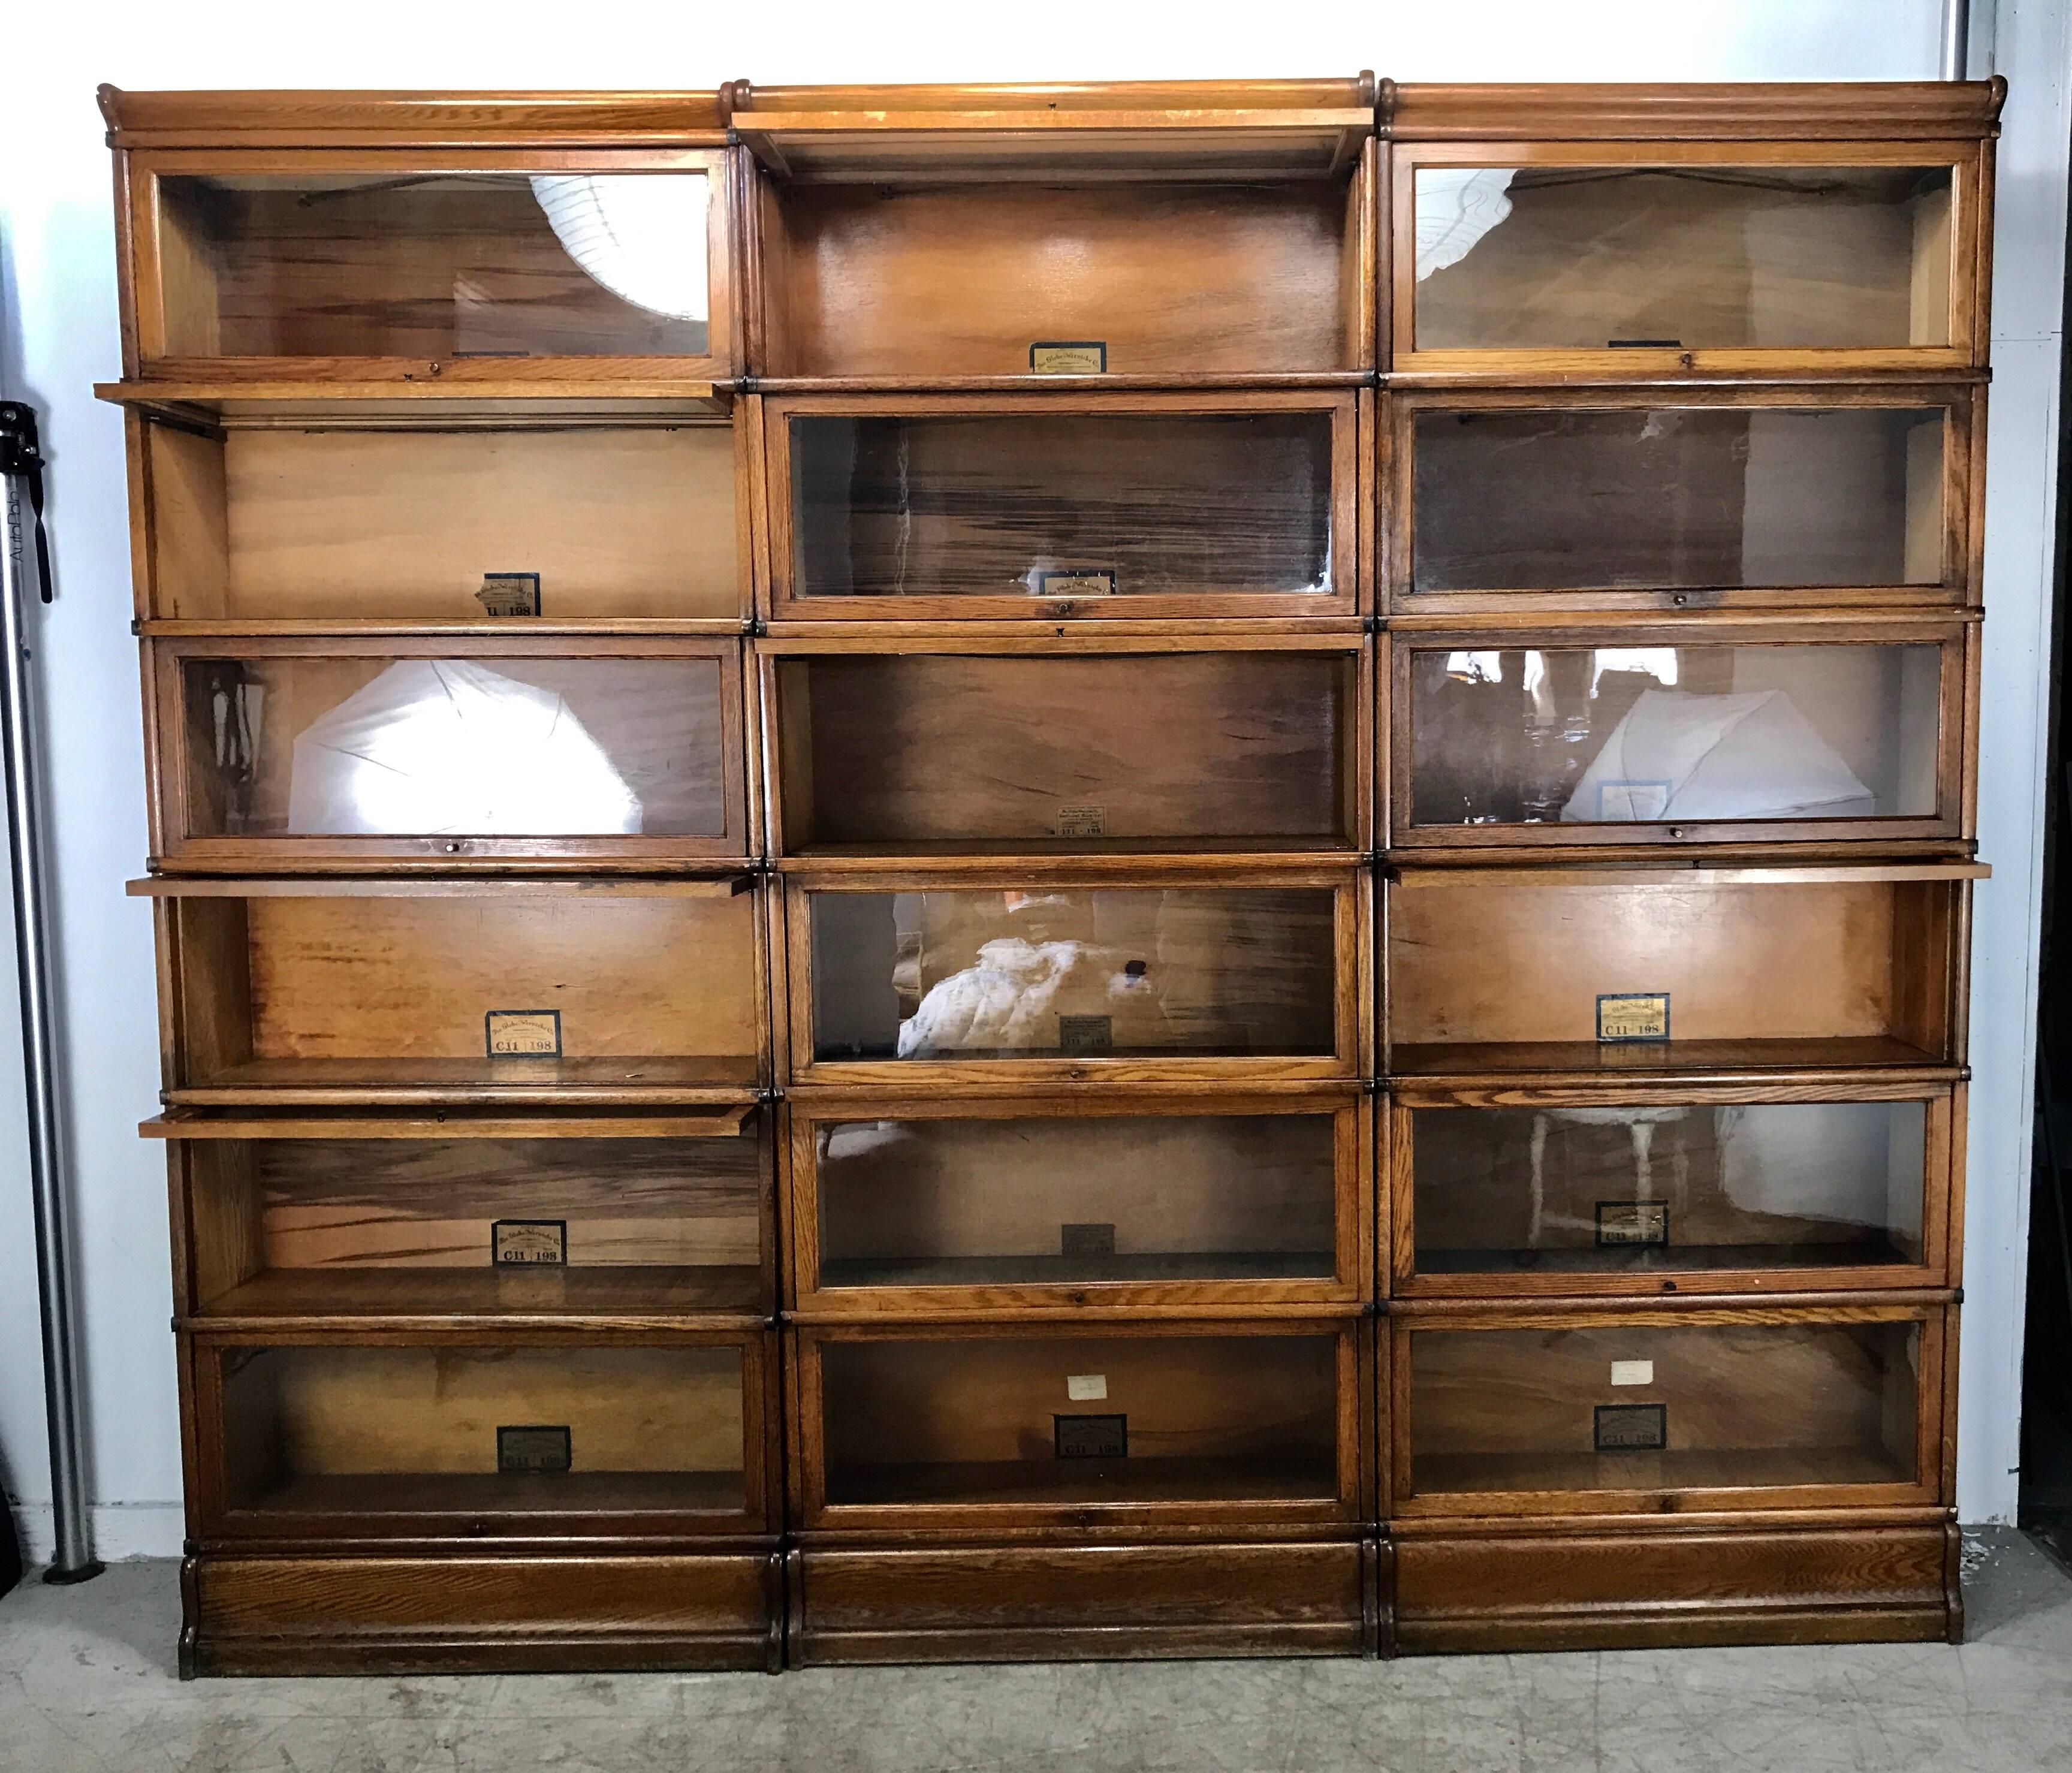 Monumental globe Wernicke oak bookcase, 18 pieces. Amazing lineup of globe Wernicke bookcase. Purchased recently out of prominent Judges office, Downtown Buffalo New York, solid oak all in perfect condition. Surface and patina .Have lived together